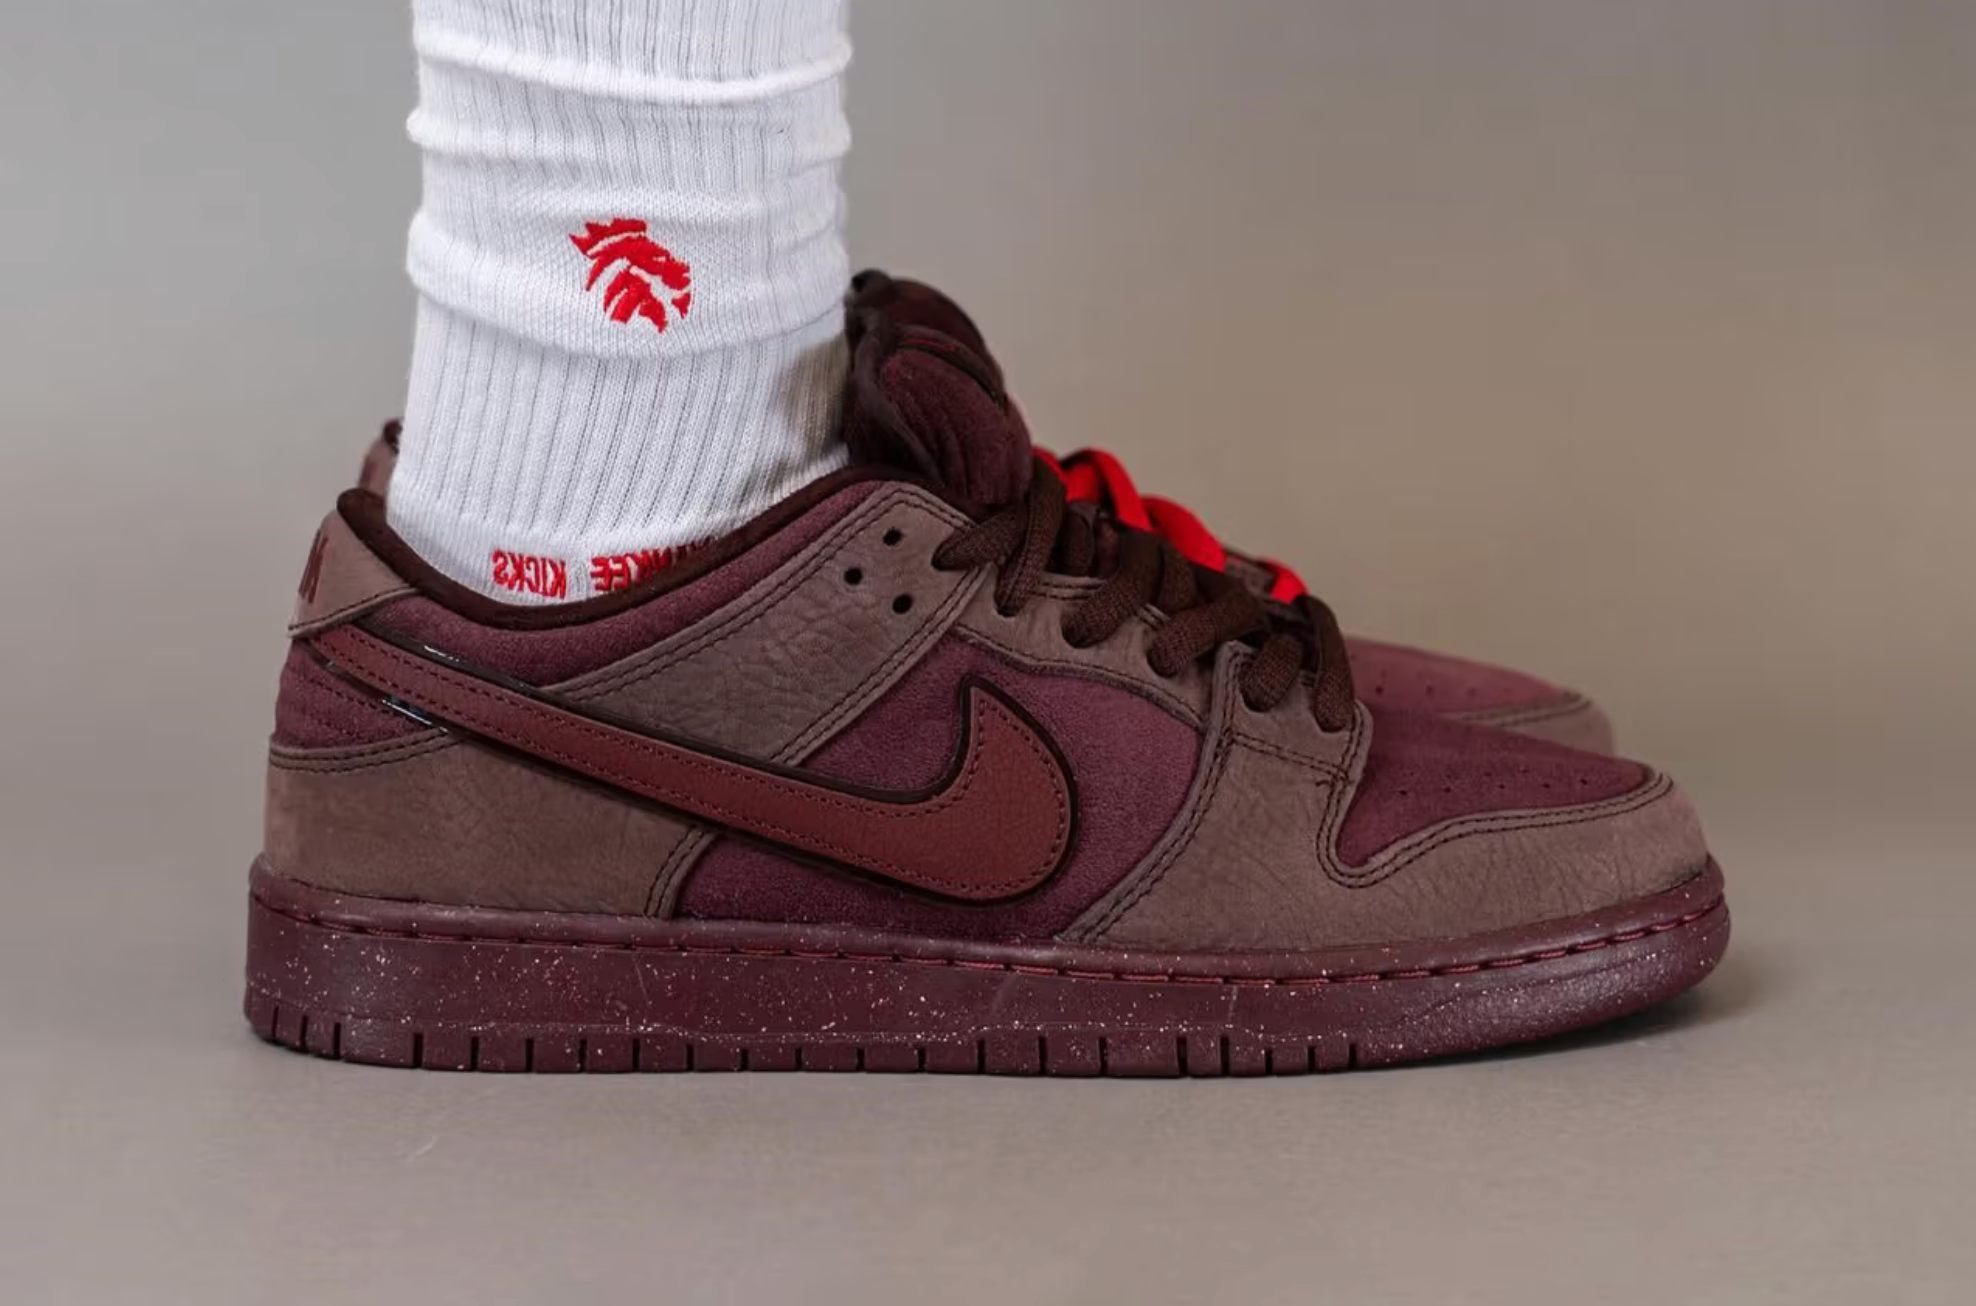  On-Foot Look at the Nike SB Dunk Low "Valentine's Day" The pair is covered in a rich “Burgundy Crush” color.